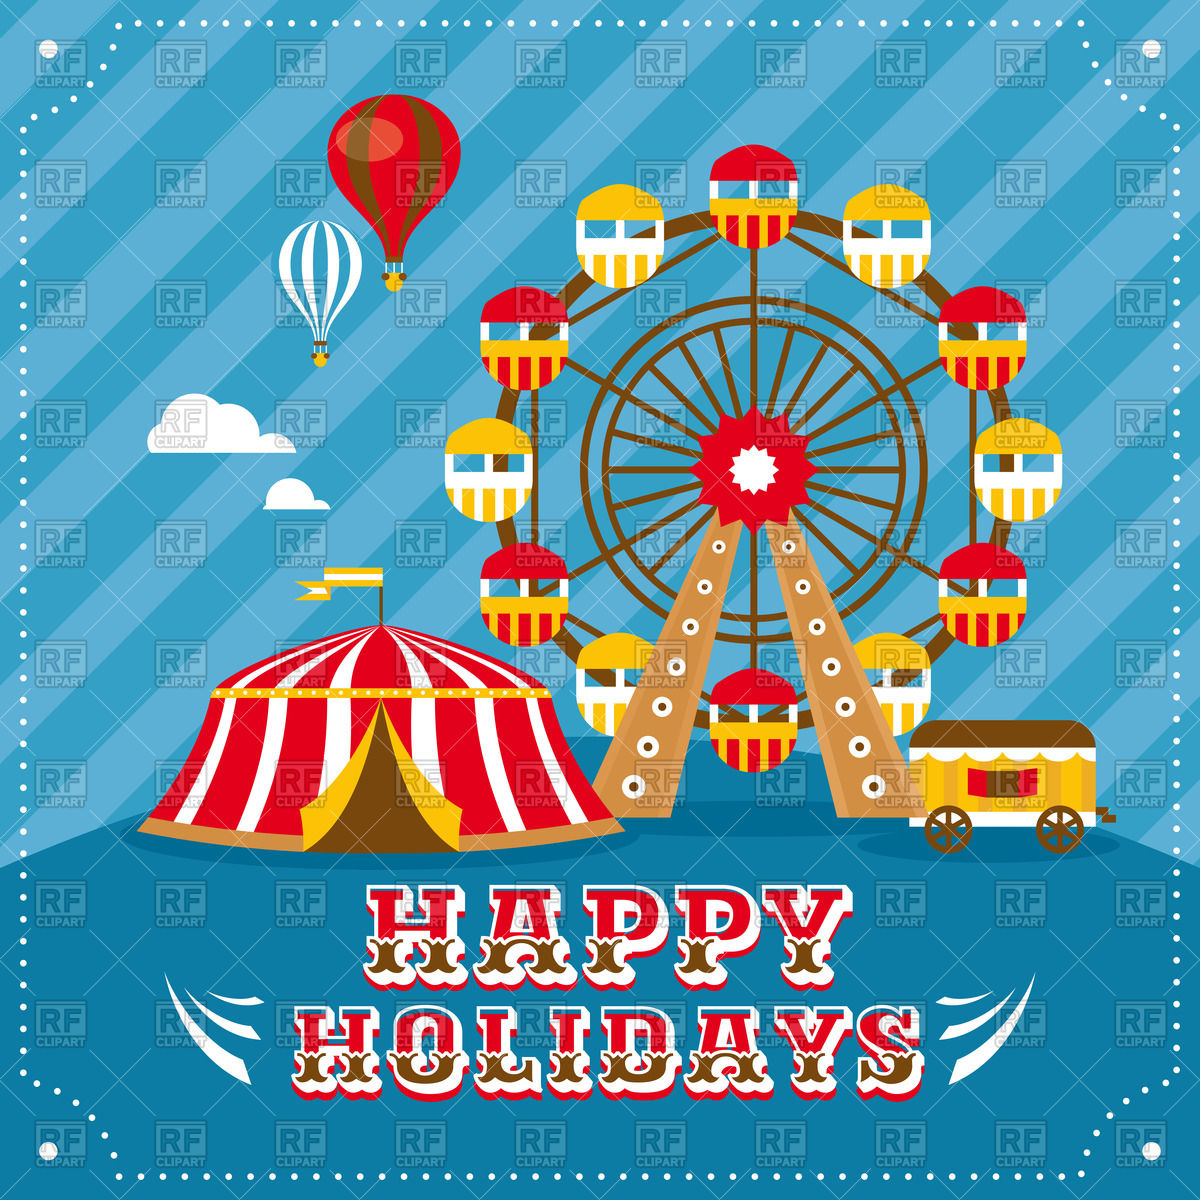 Silhouette of ferris wheel holiday download free clipart 2